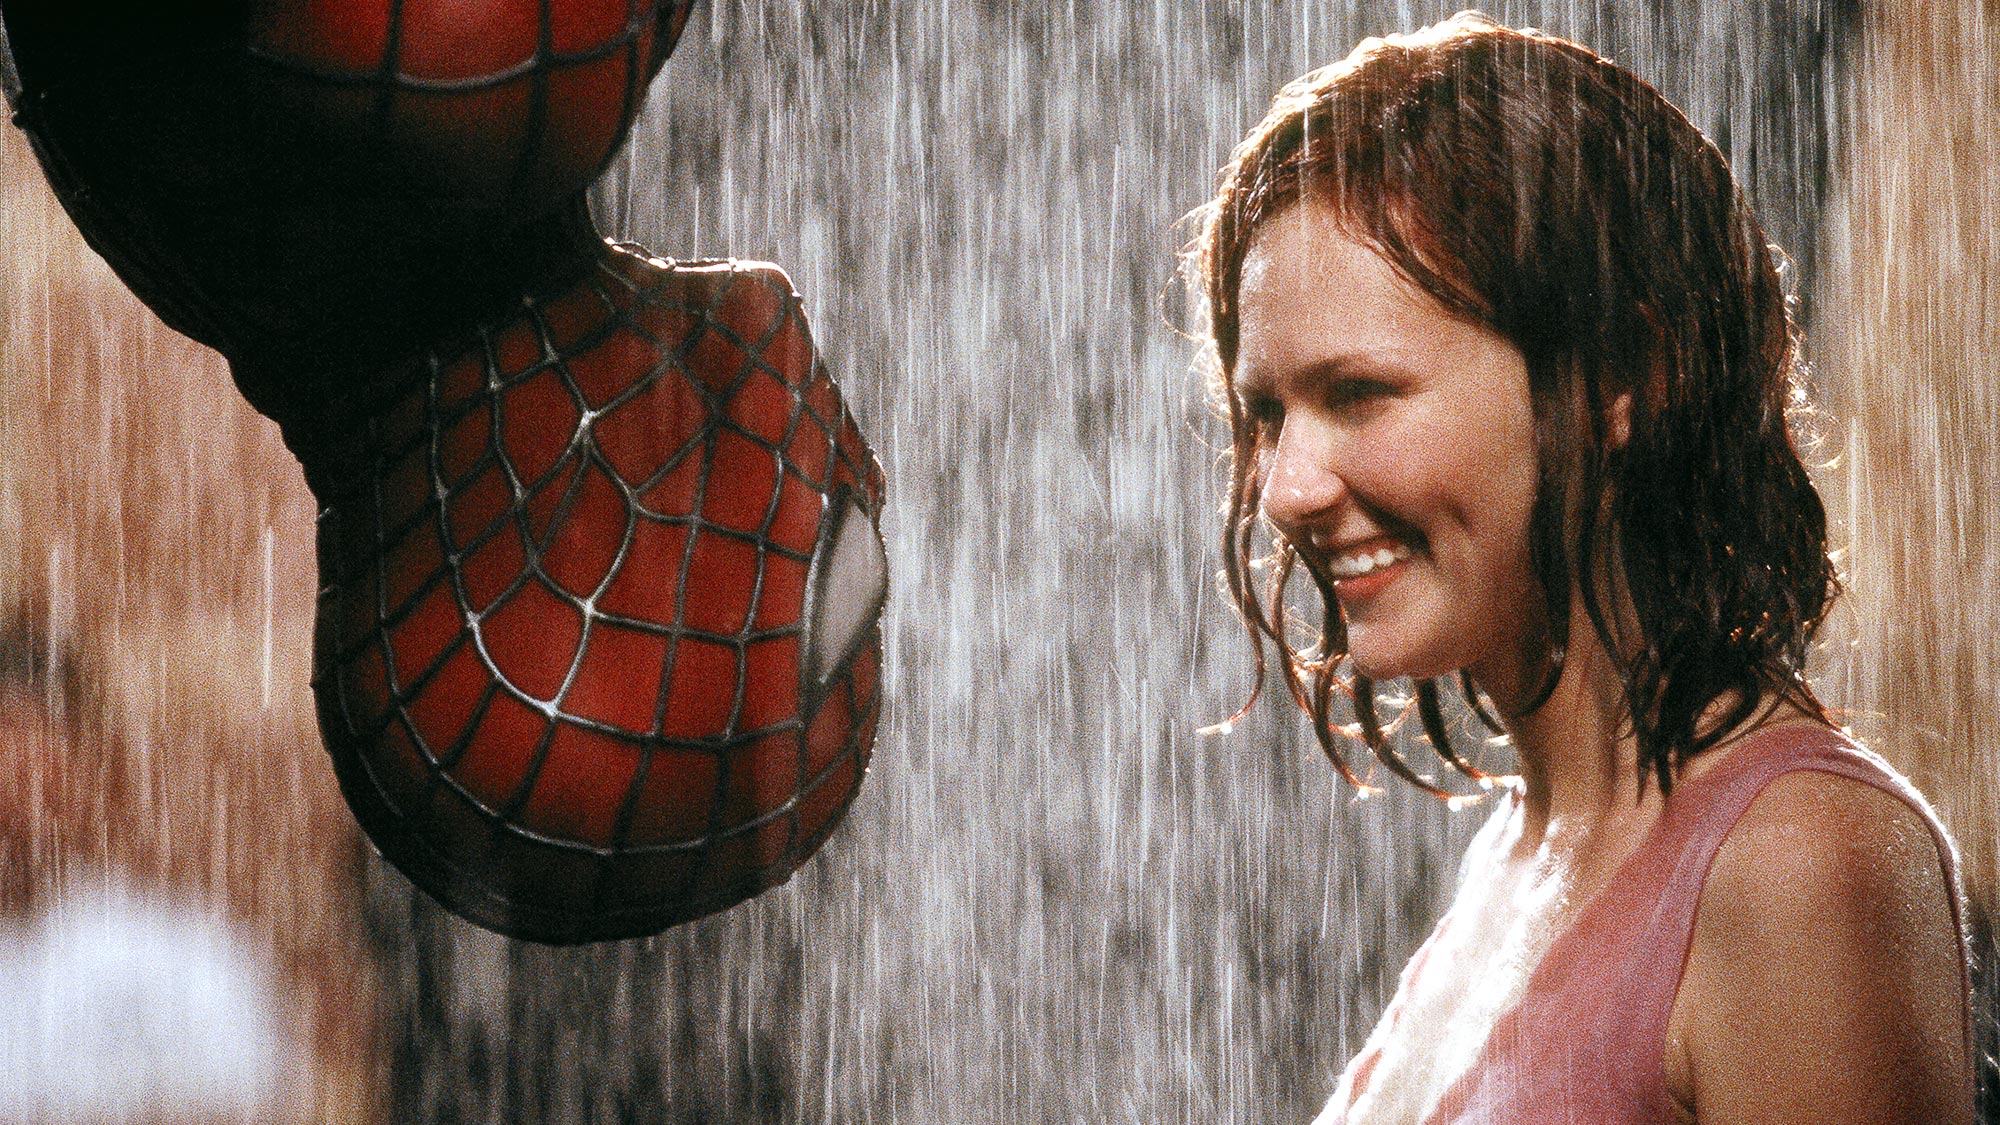 Spider-Man and Mary Jane in Spider-Man (2002)